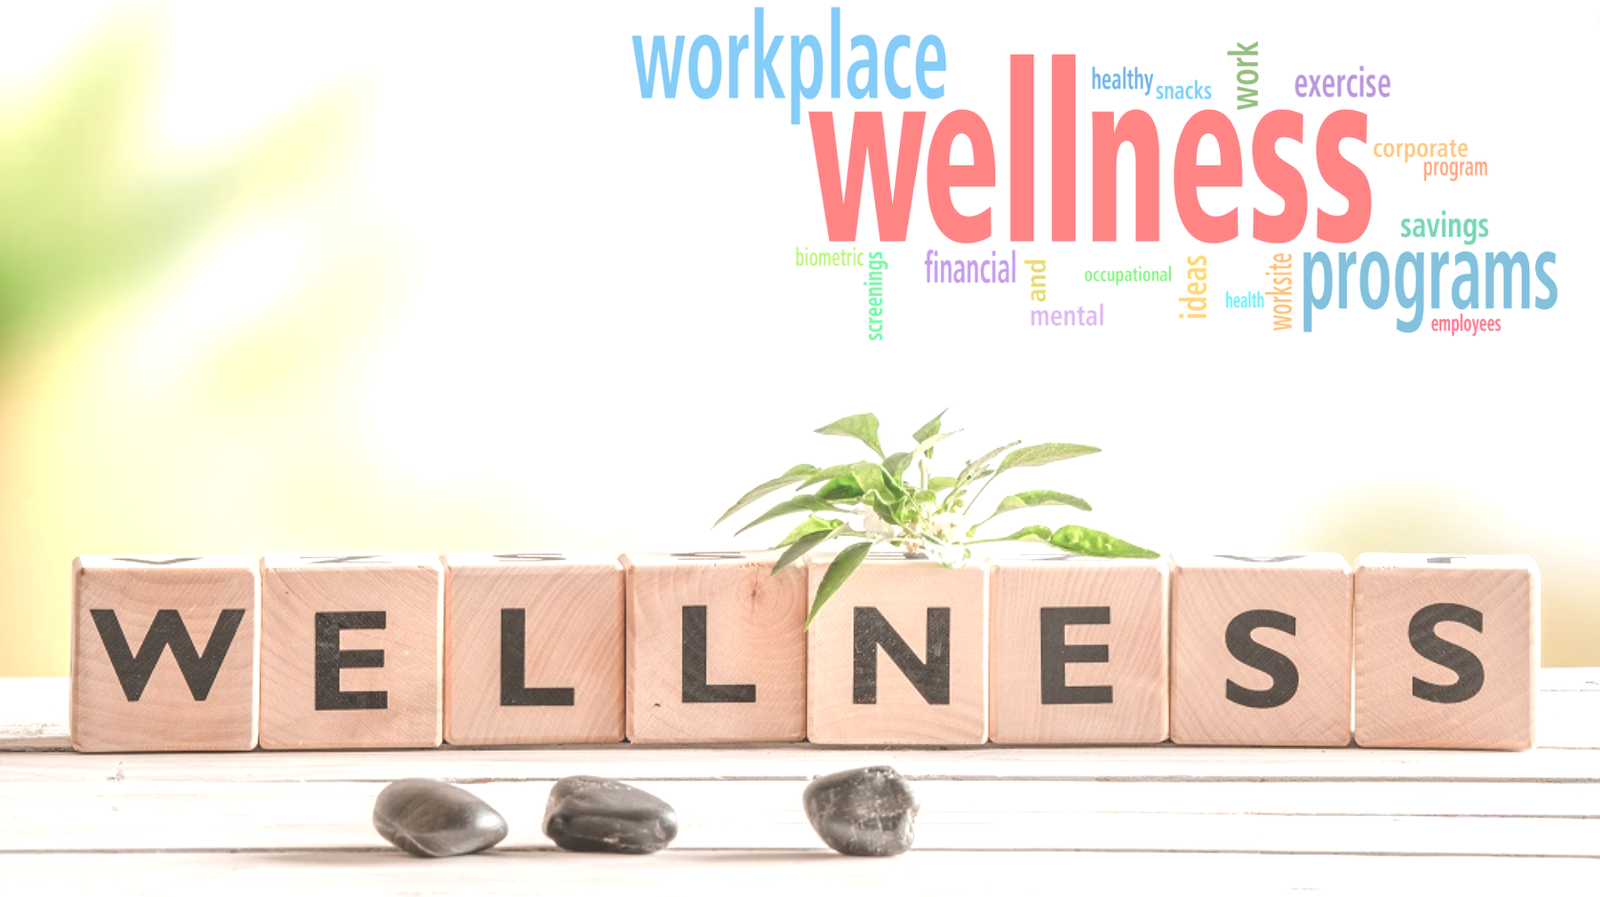 Tips for Workplace Wellness